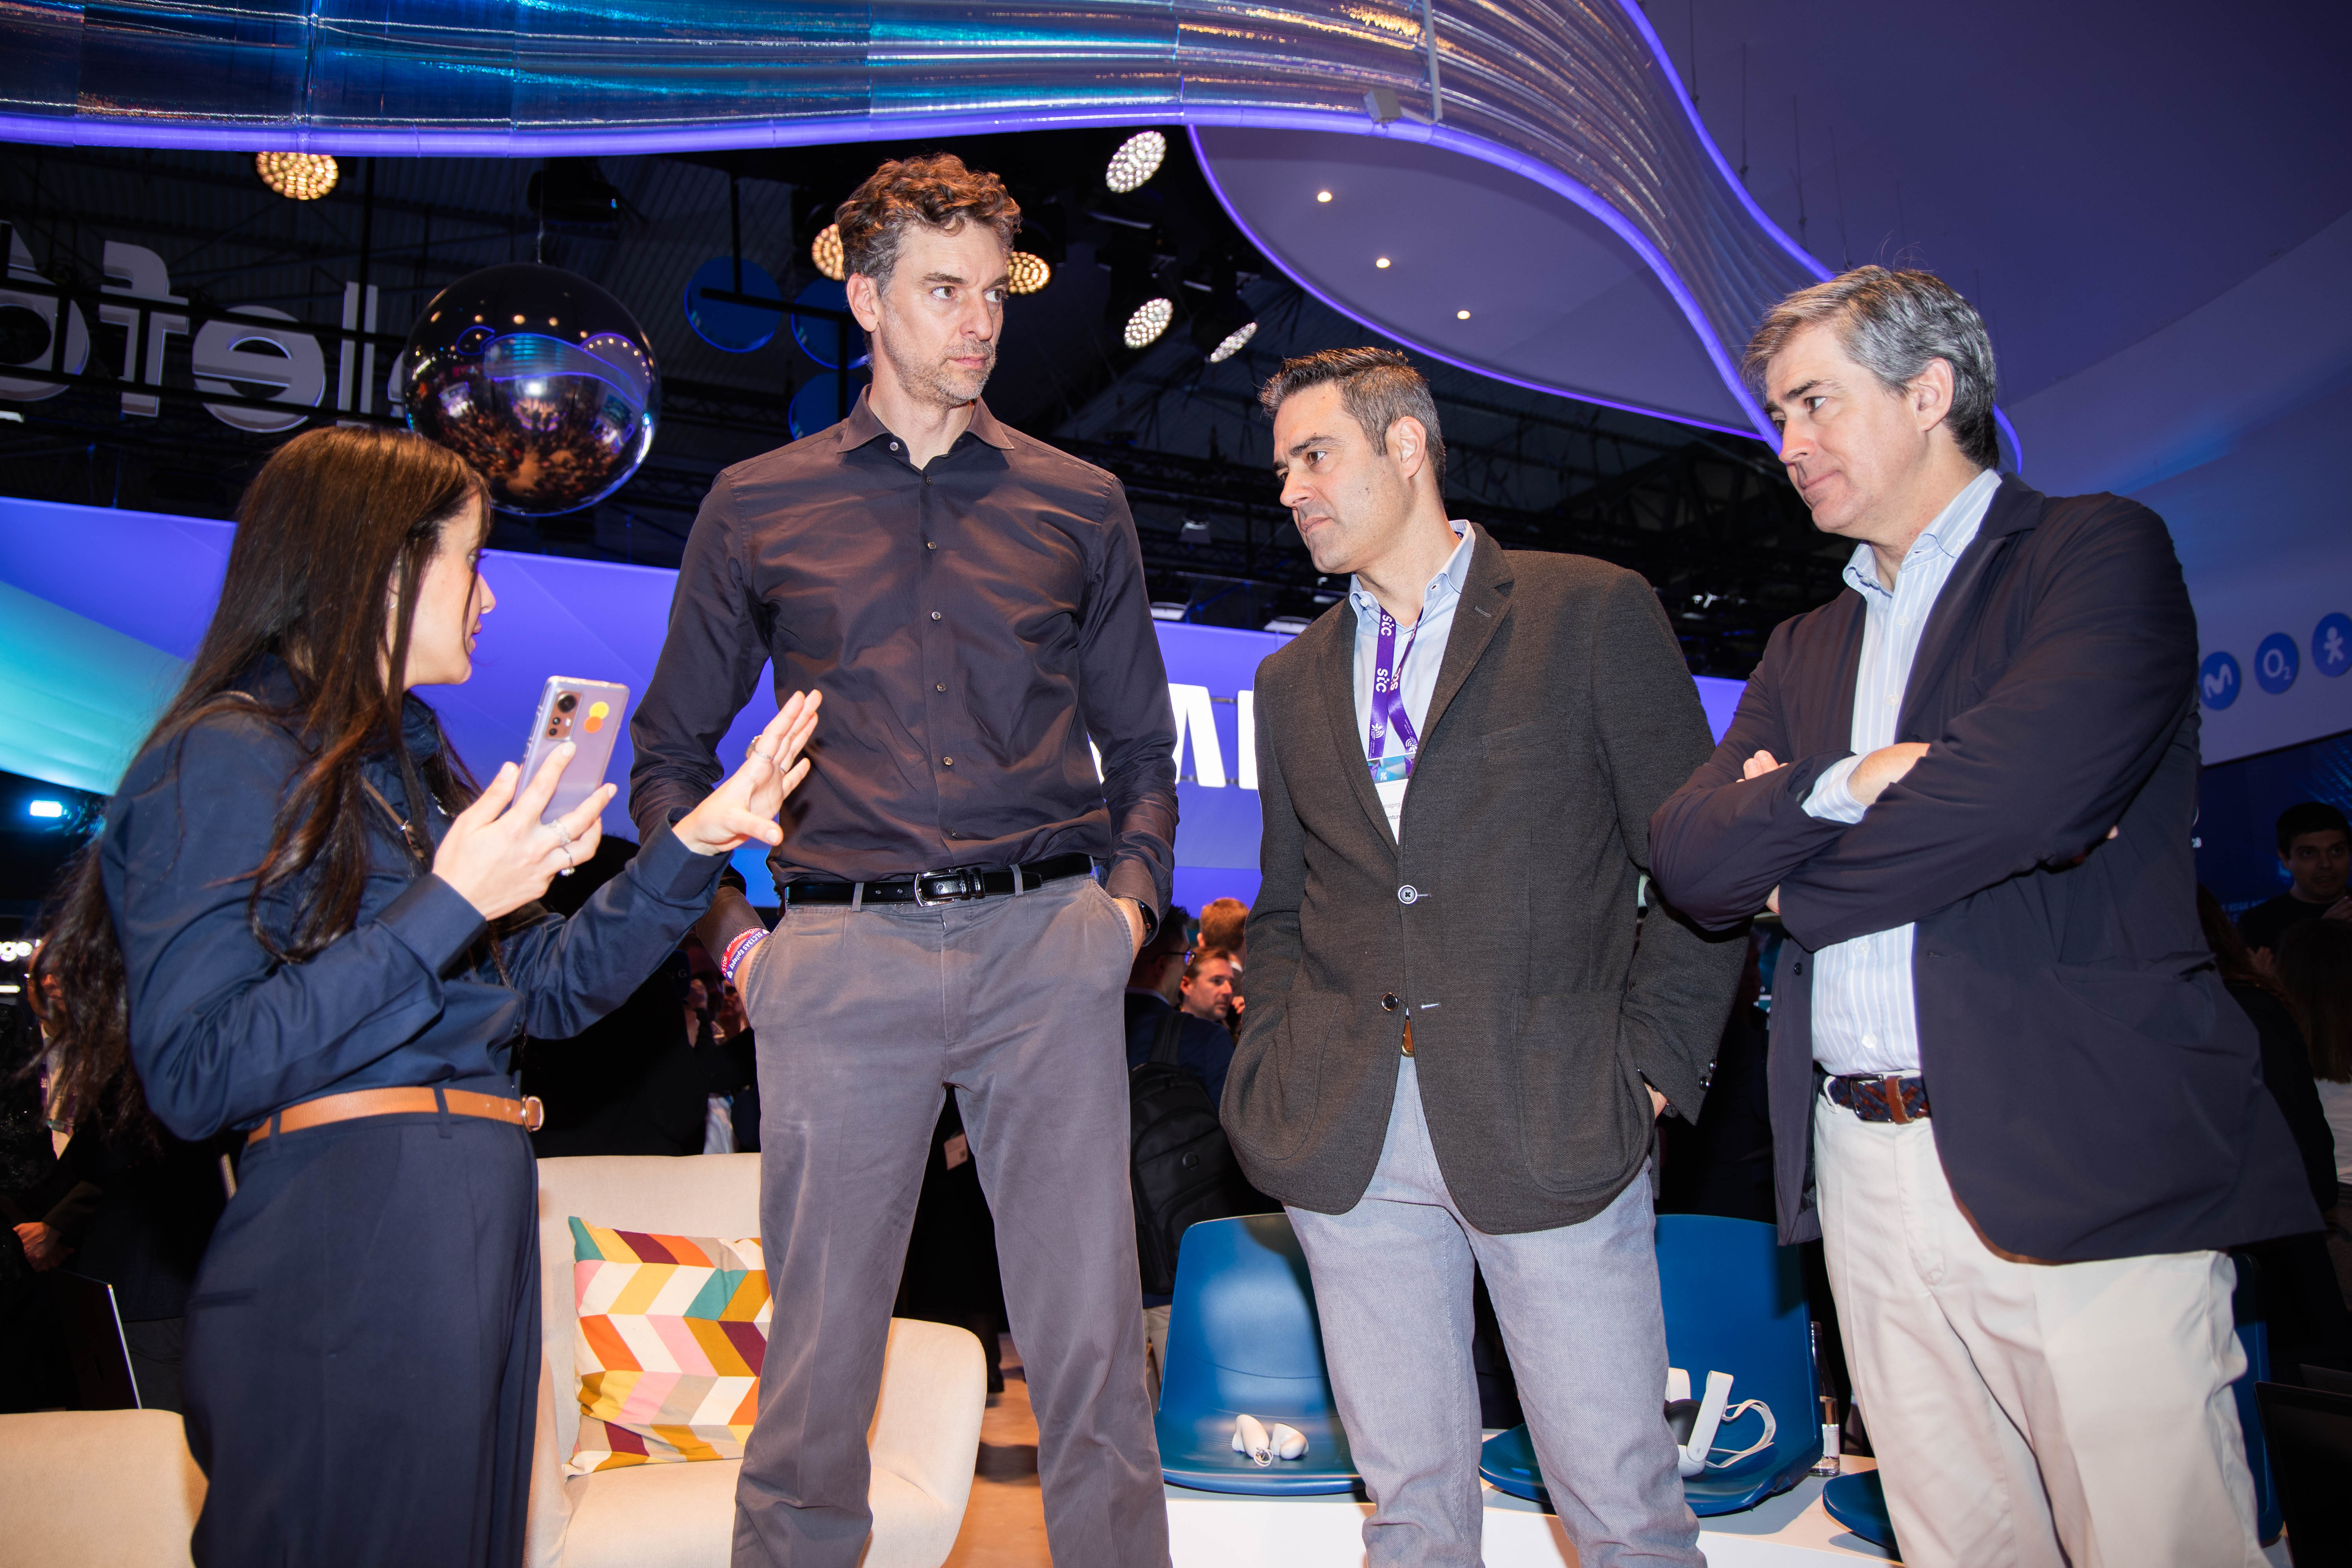 Pau Gasol, his manager Ferrán Prieto and Rafael Fernández de Alarcón, Telefónica's Director of Brand and Sponsorship, attend a presentation at the Telefónica stand